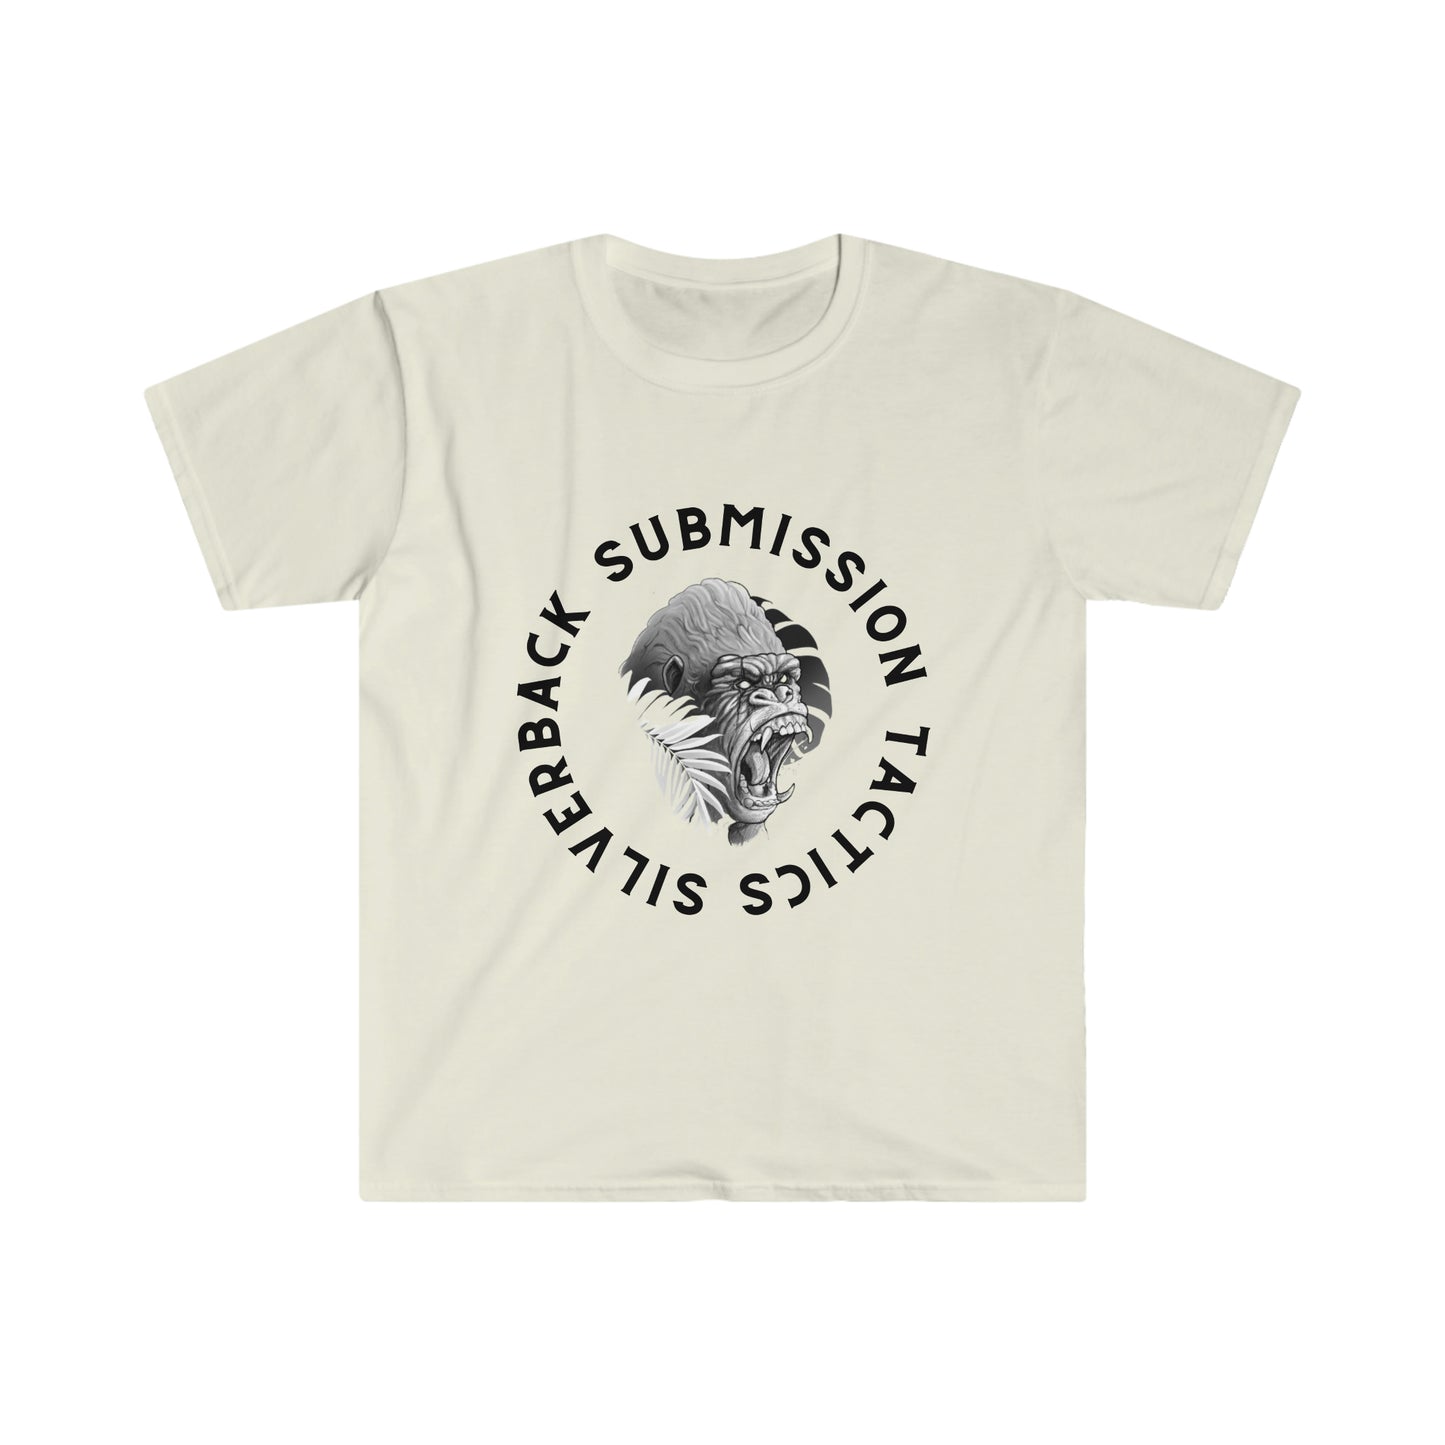 Unisex Silverback Submission Tactics Softstyle T-Shirt